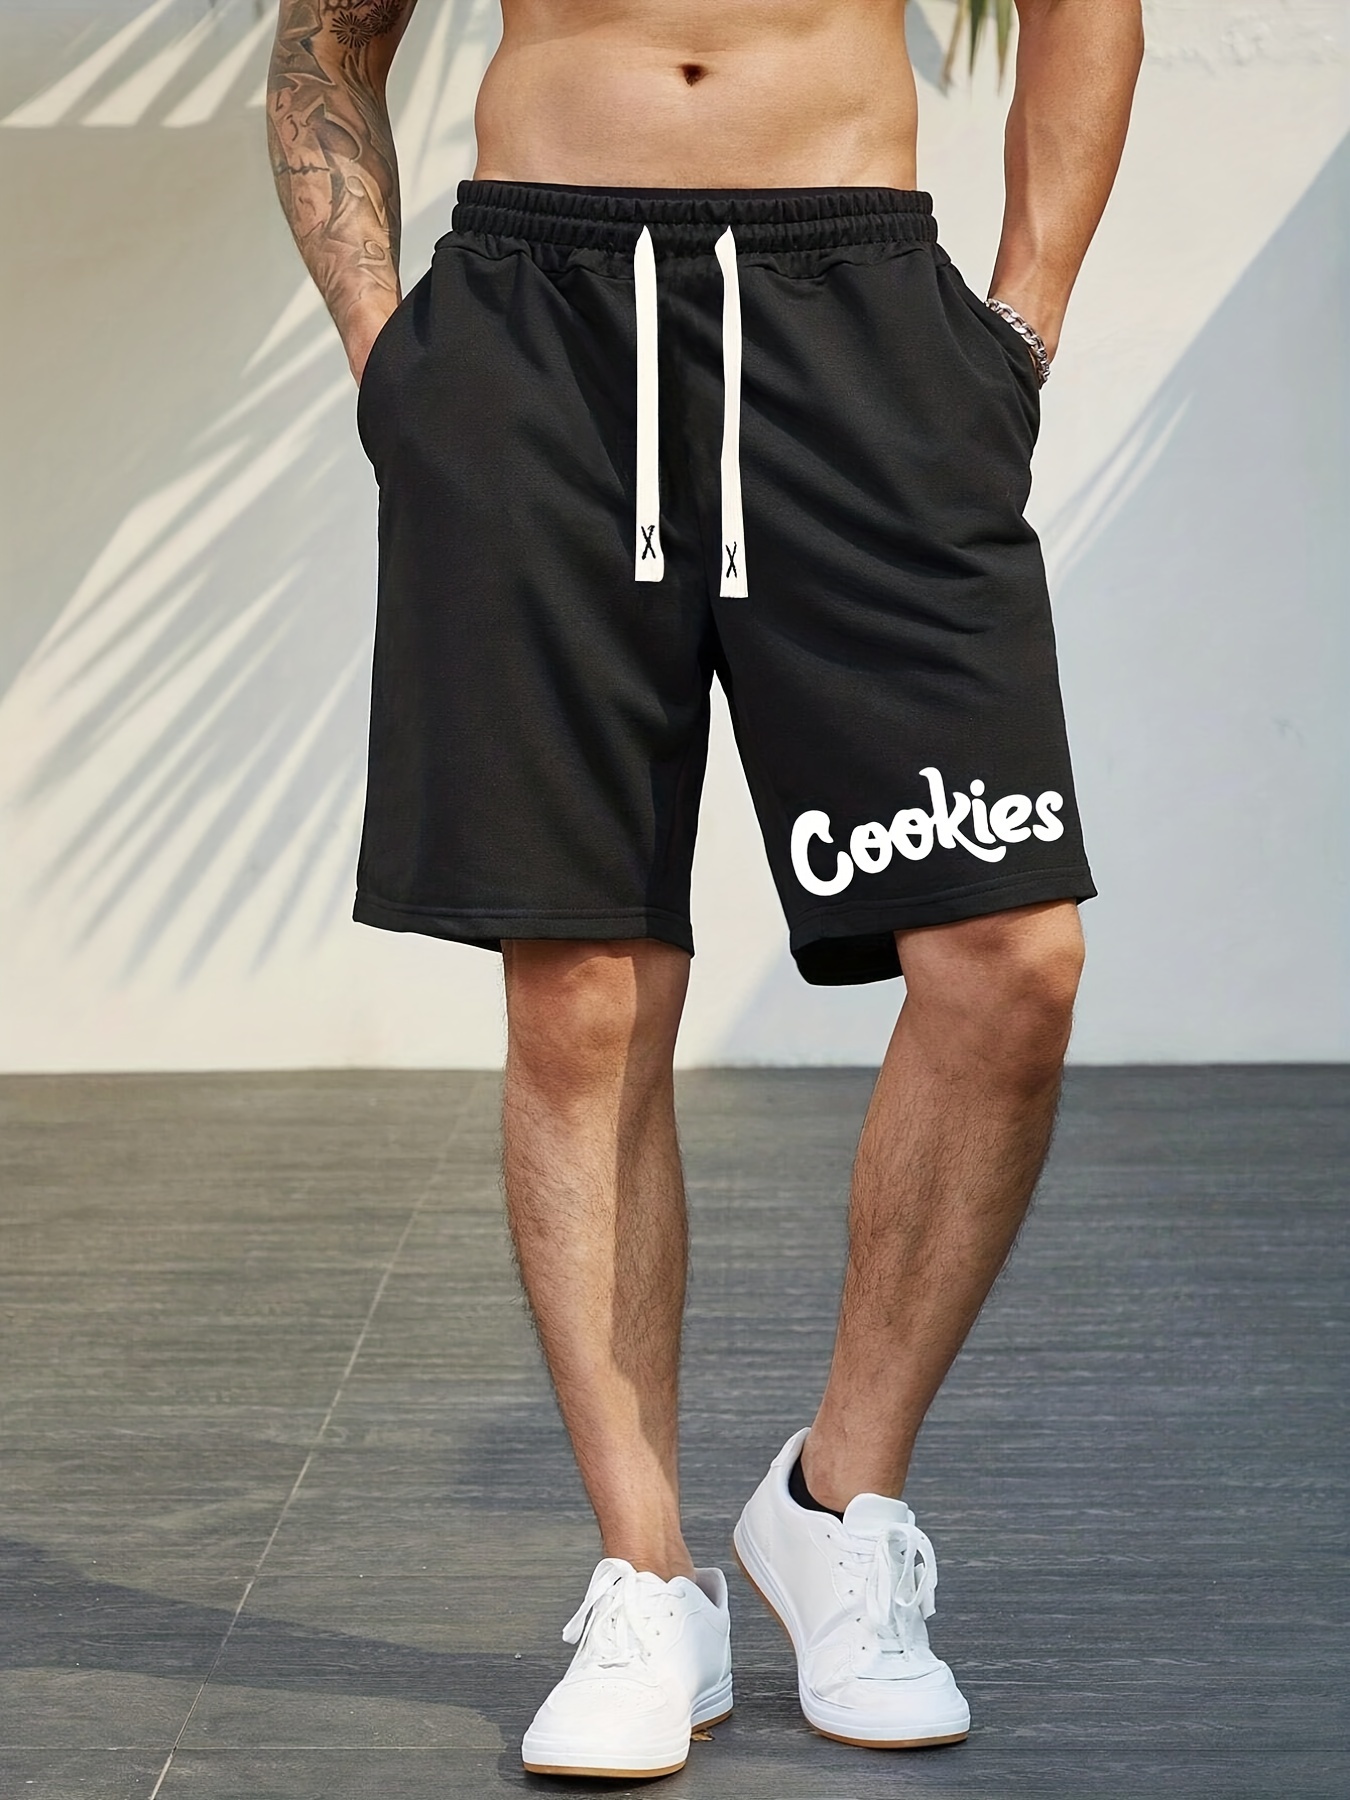 Trendsetting running shorts no logo For Leisure And Fashion